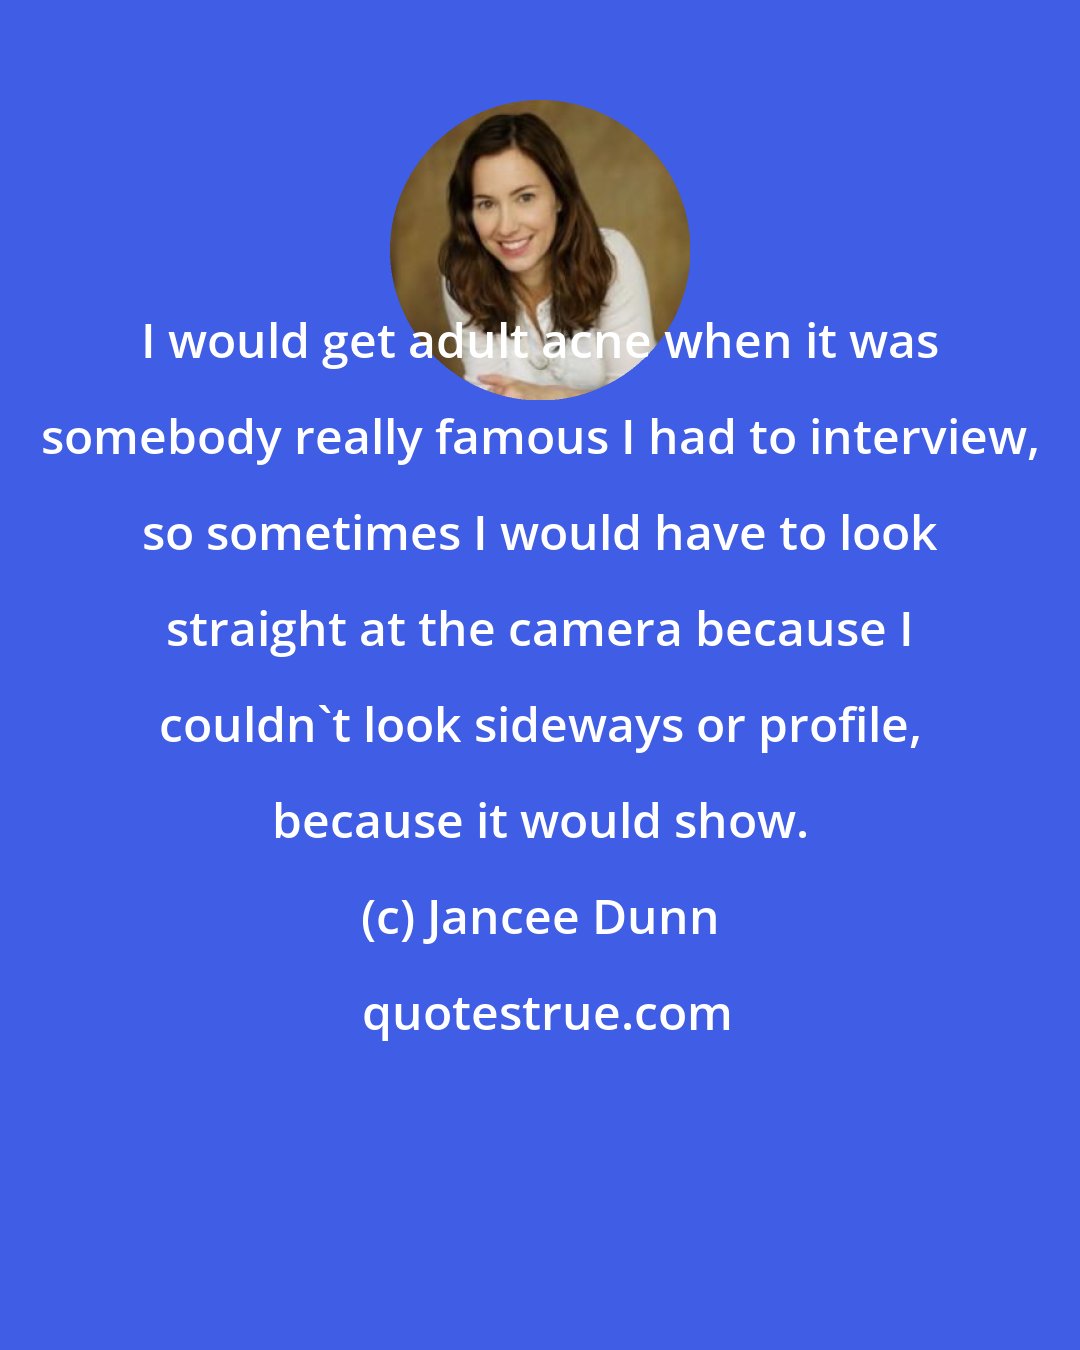 Jancee Dunn: I would get adult acne when it was somebody really famous I had to interview, so sometimes I would have to look straight at the camera because I couldn't look sideways or profile, because it would show.